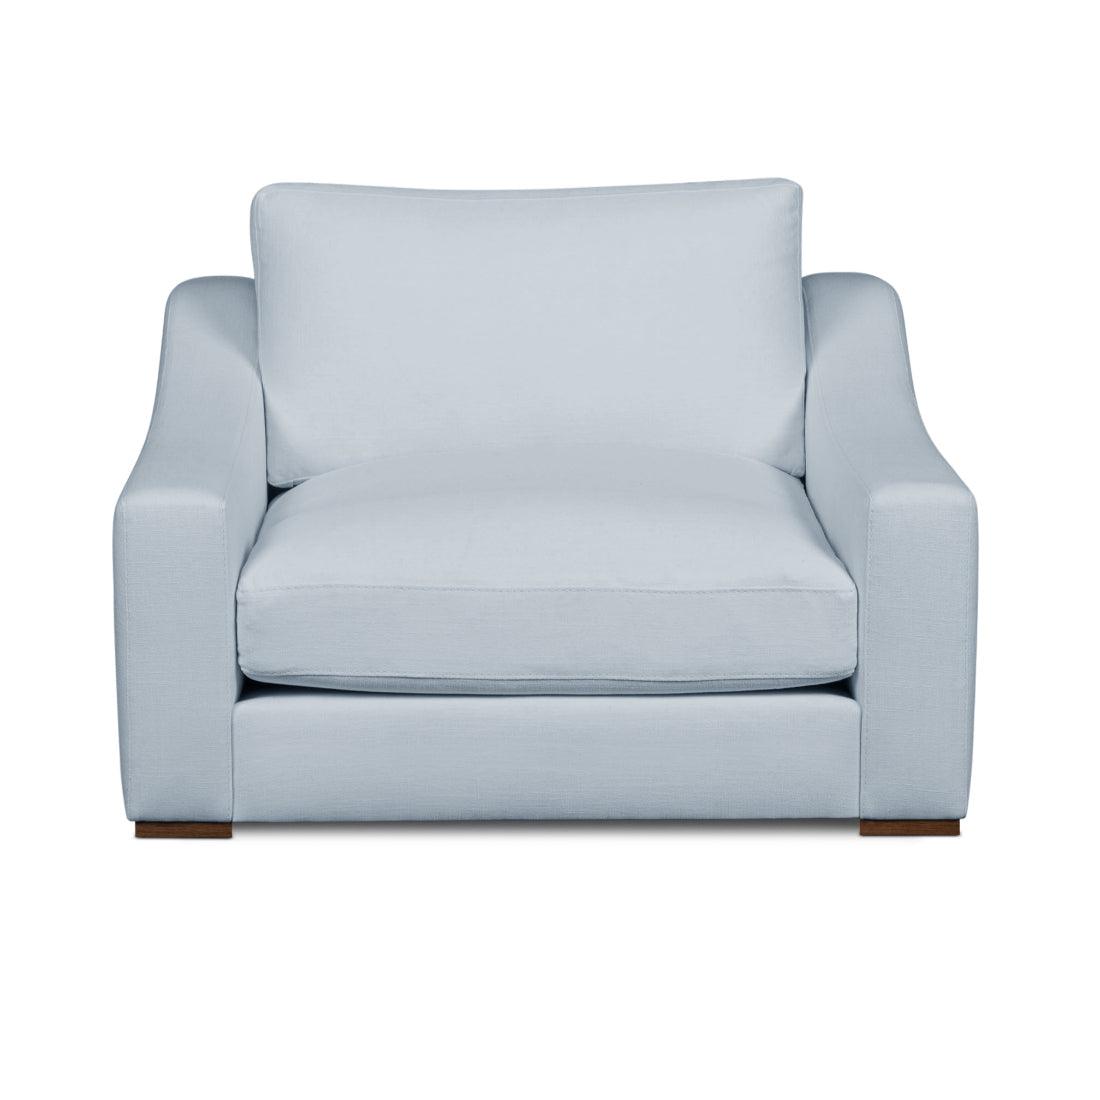 Hilary Stain Resistant Upholstery Club Chair - Uptown Sebastian